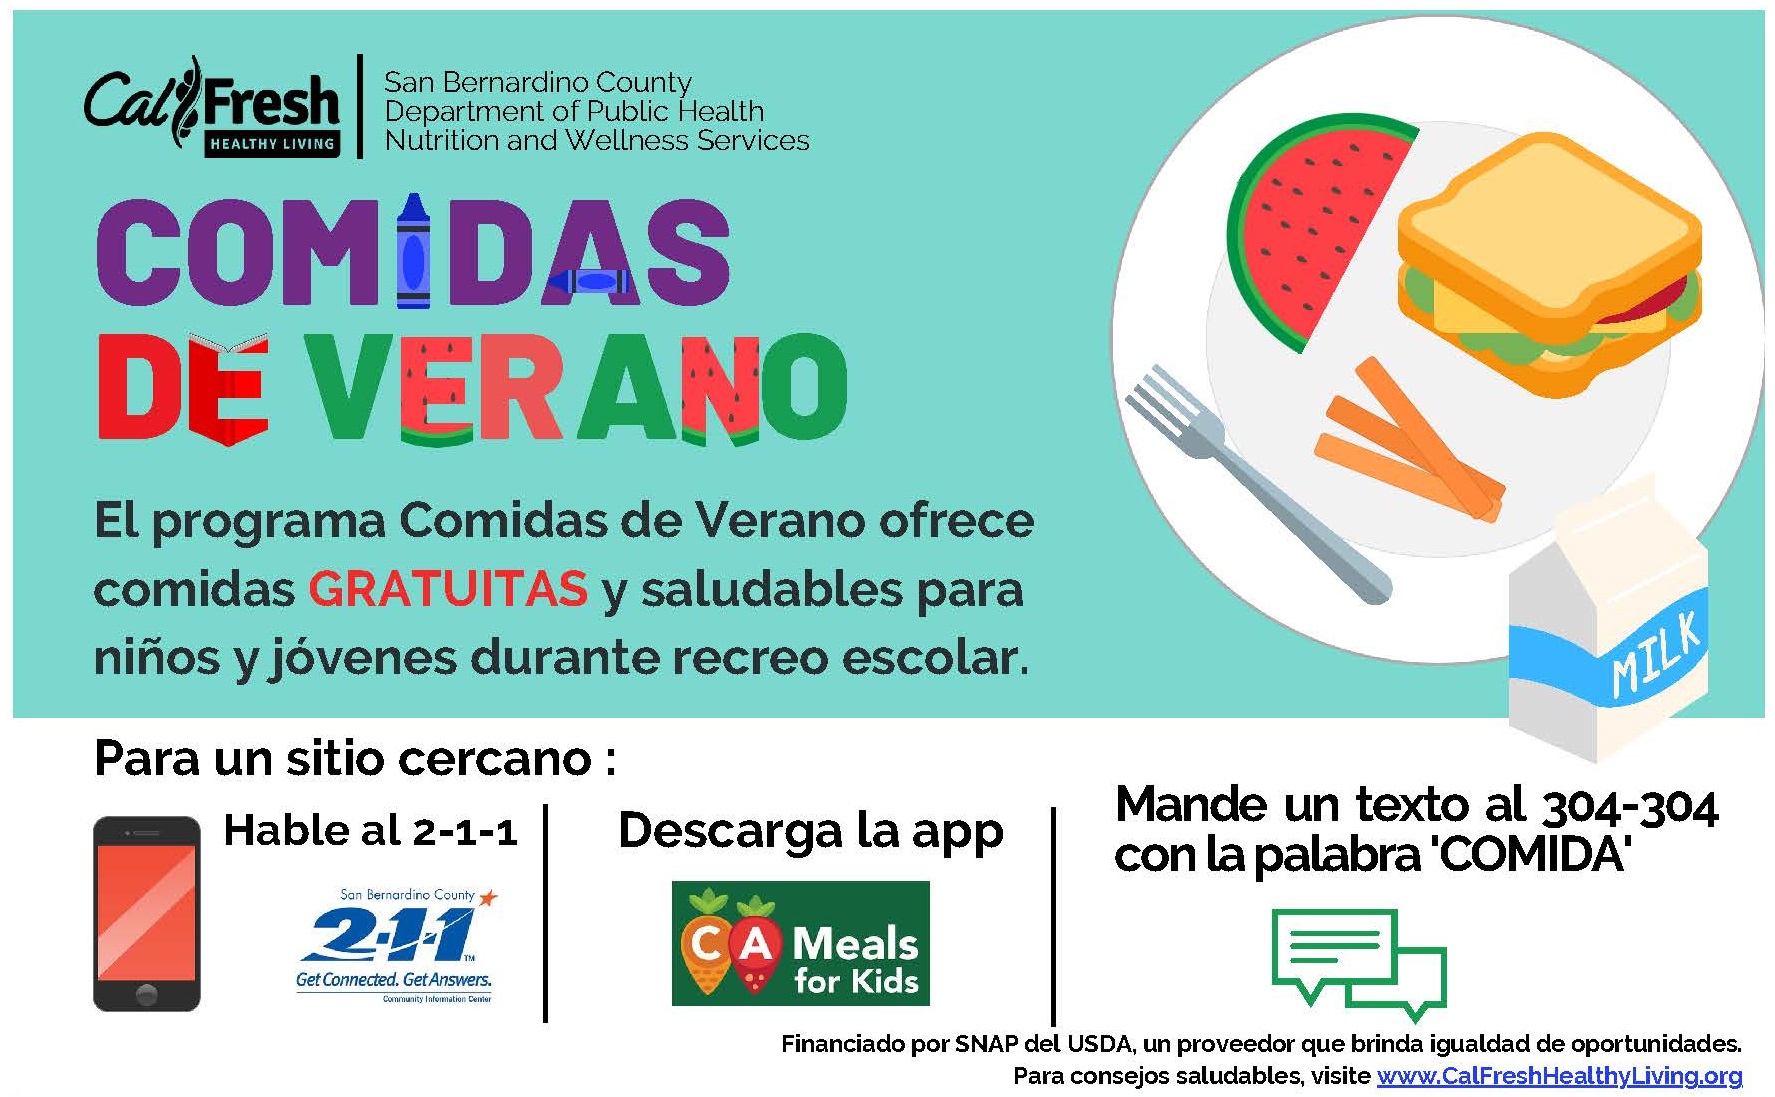 Instructions in Spanish on how to find summer meals for kids, repeated in accompanying text, below